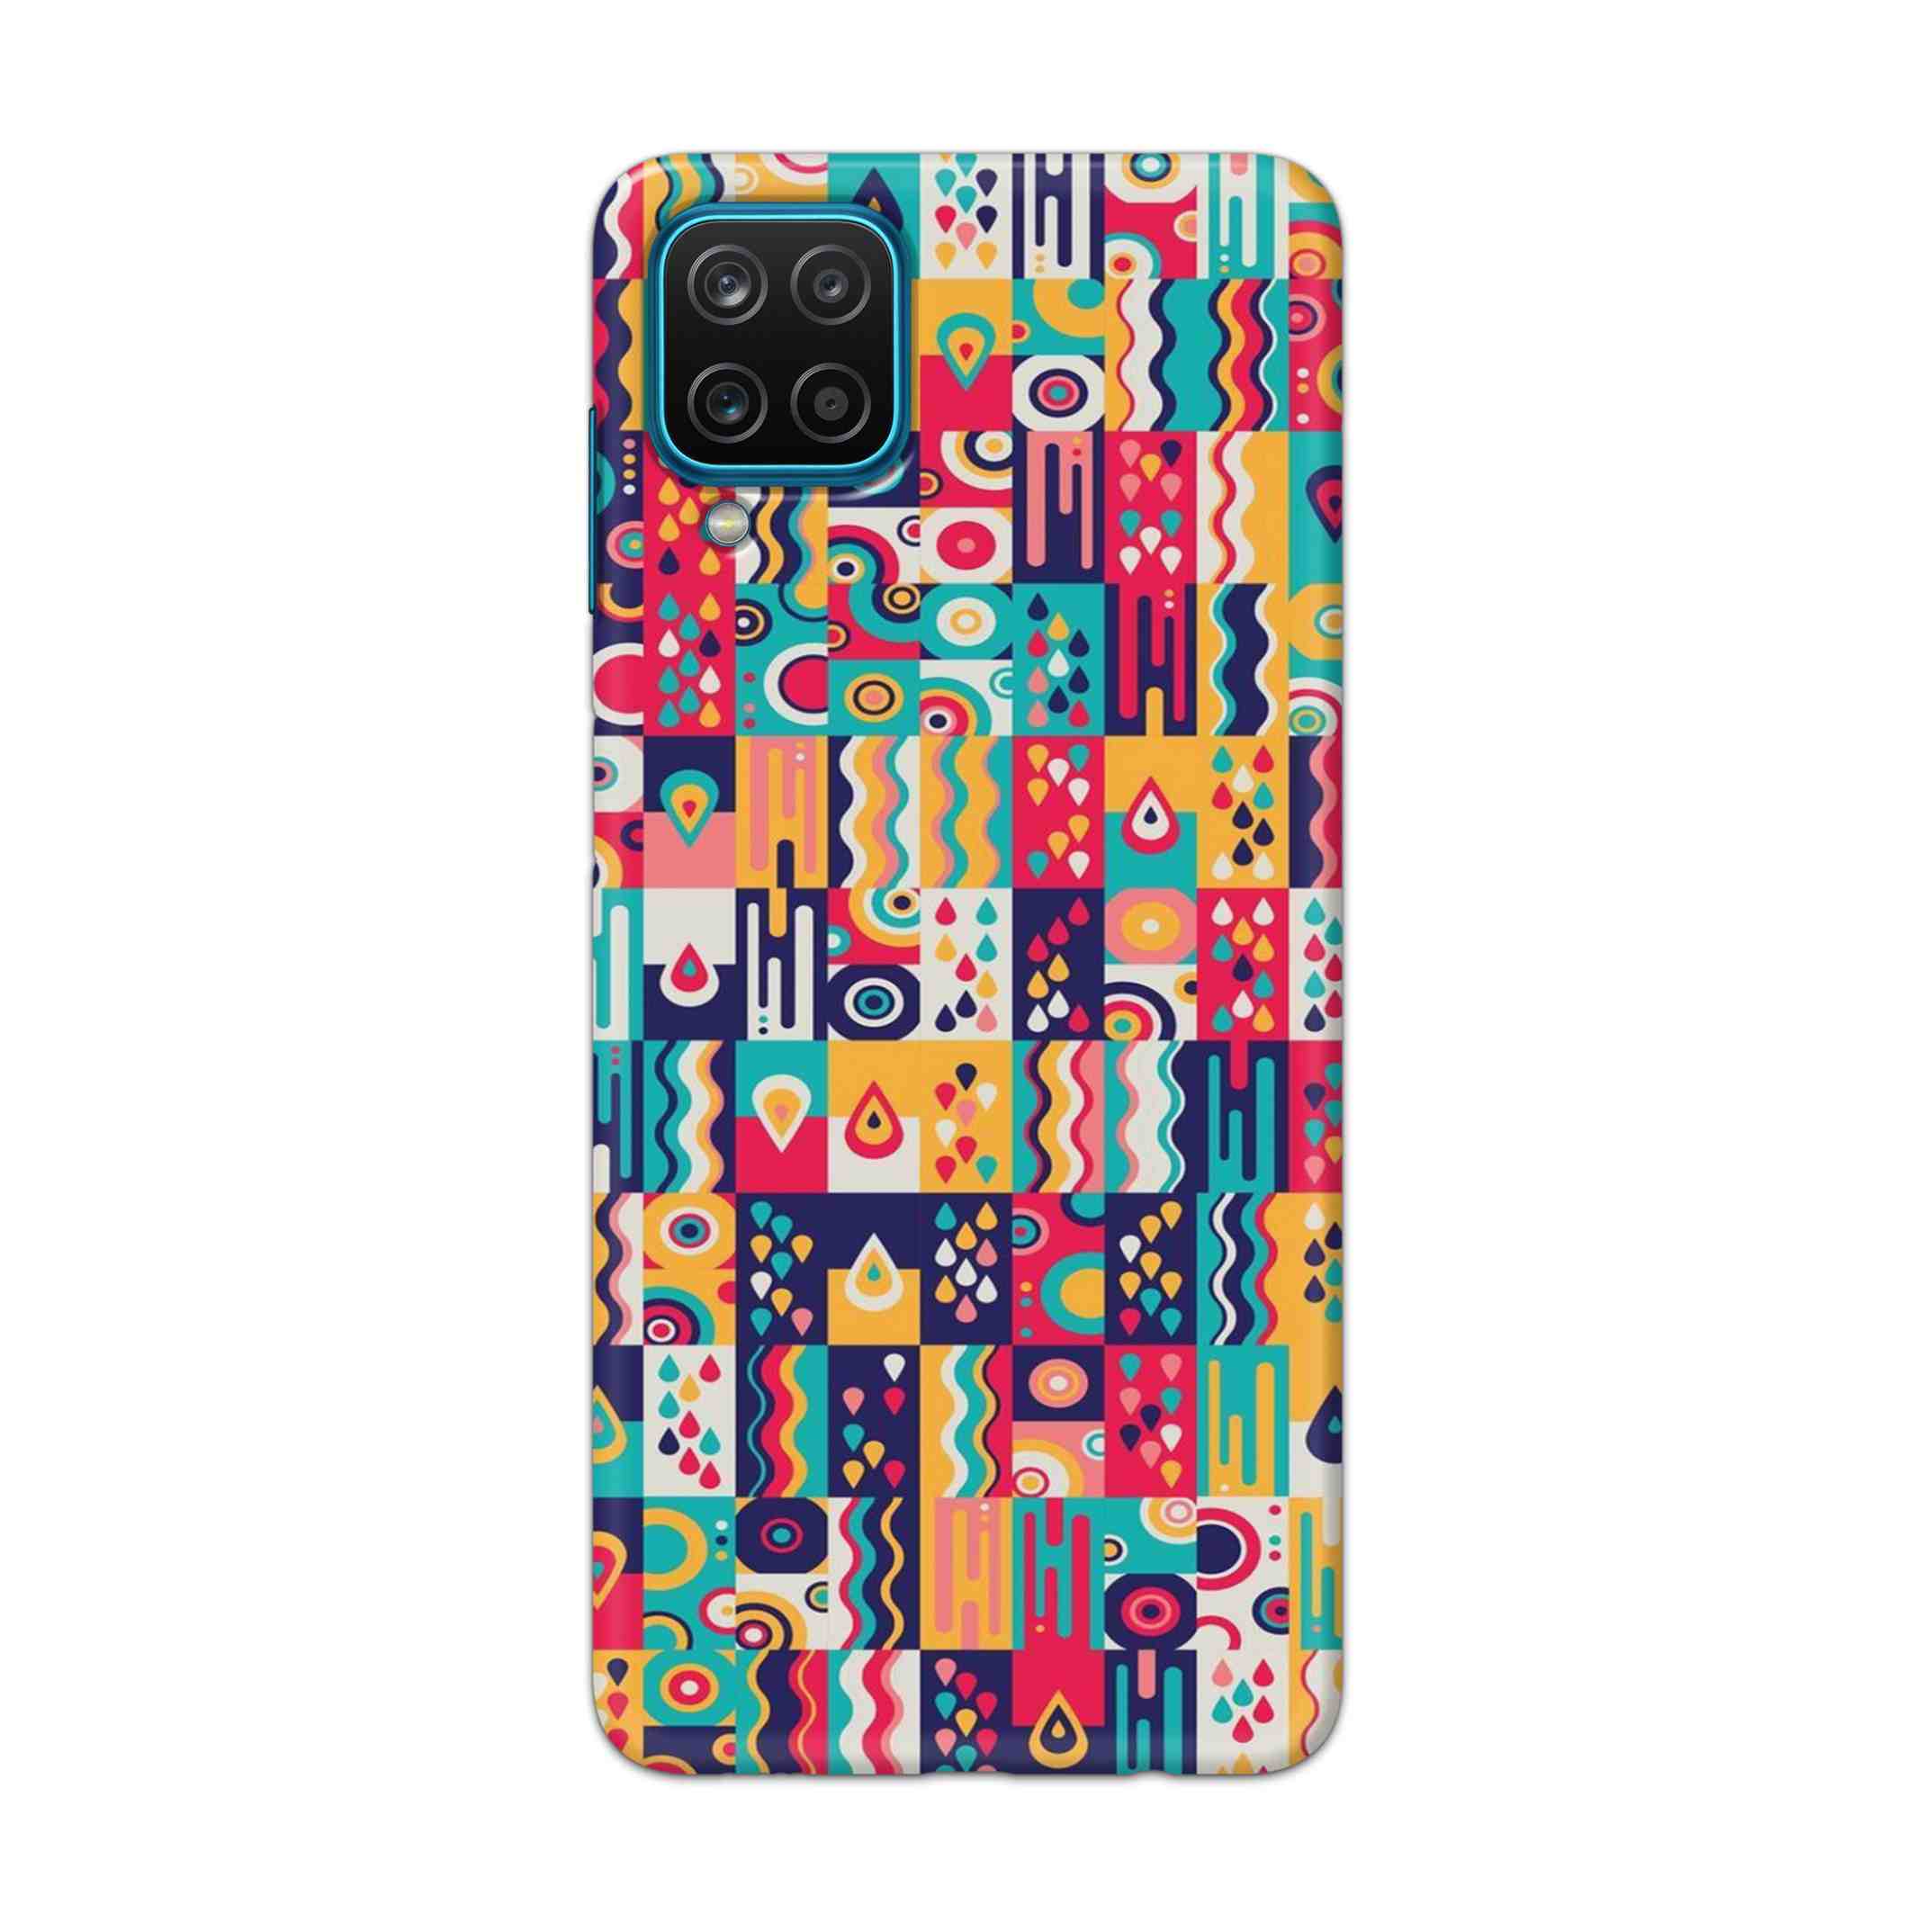 Buy Art Hard Back Mobile Phone Case Cover For Samsung Galaxy A12 Online